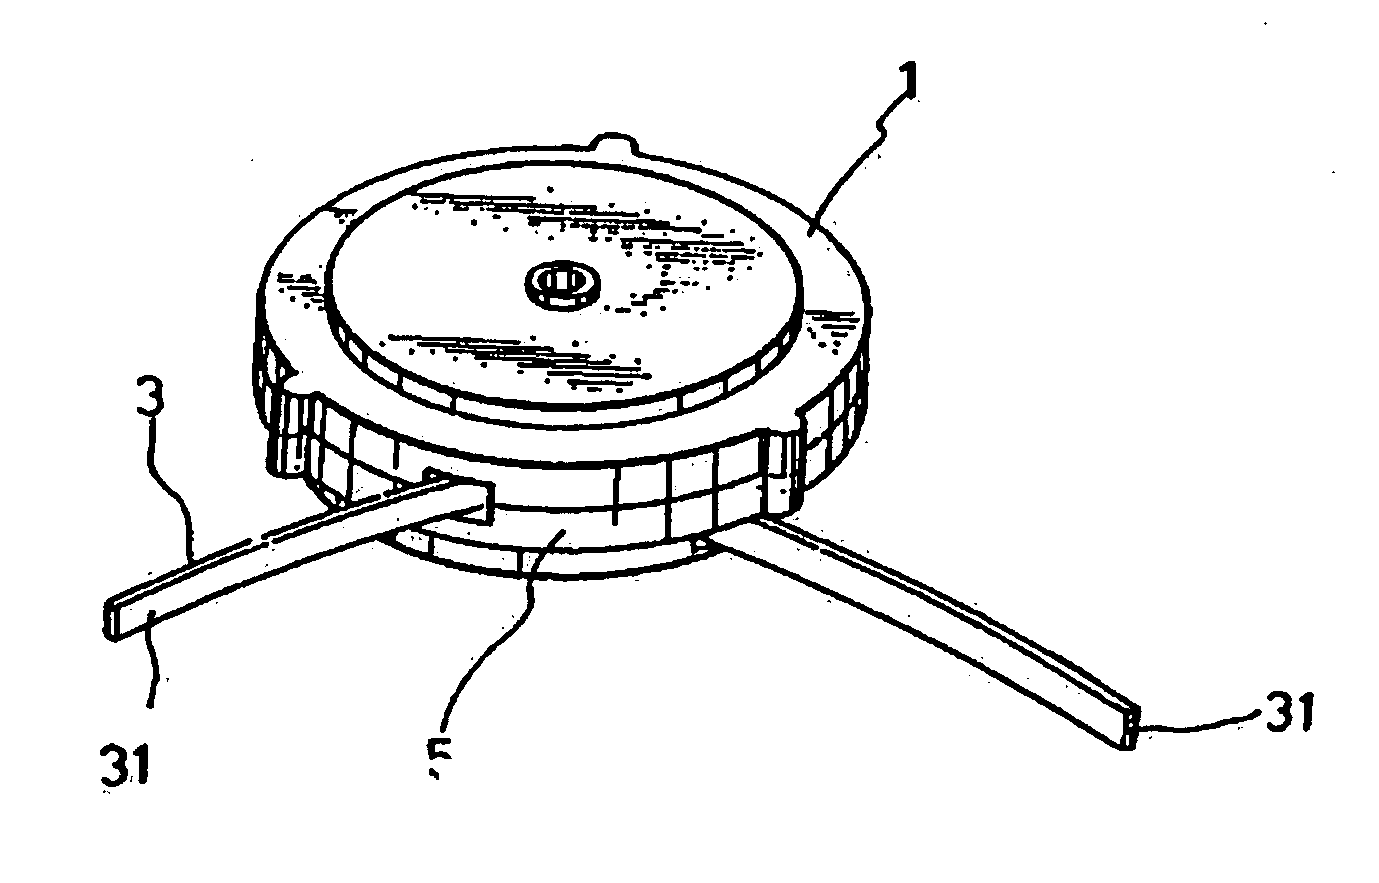 Structure of a single-pull reel